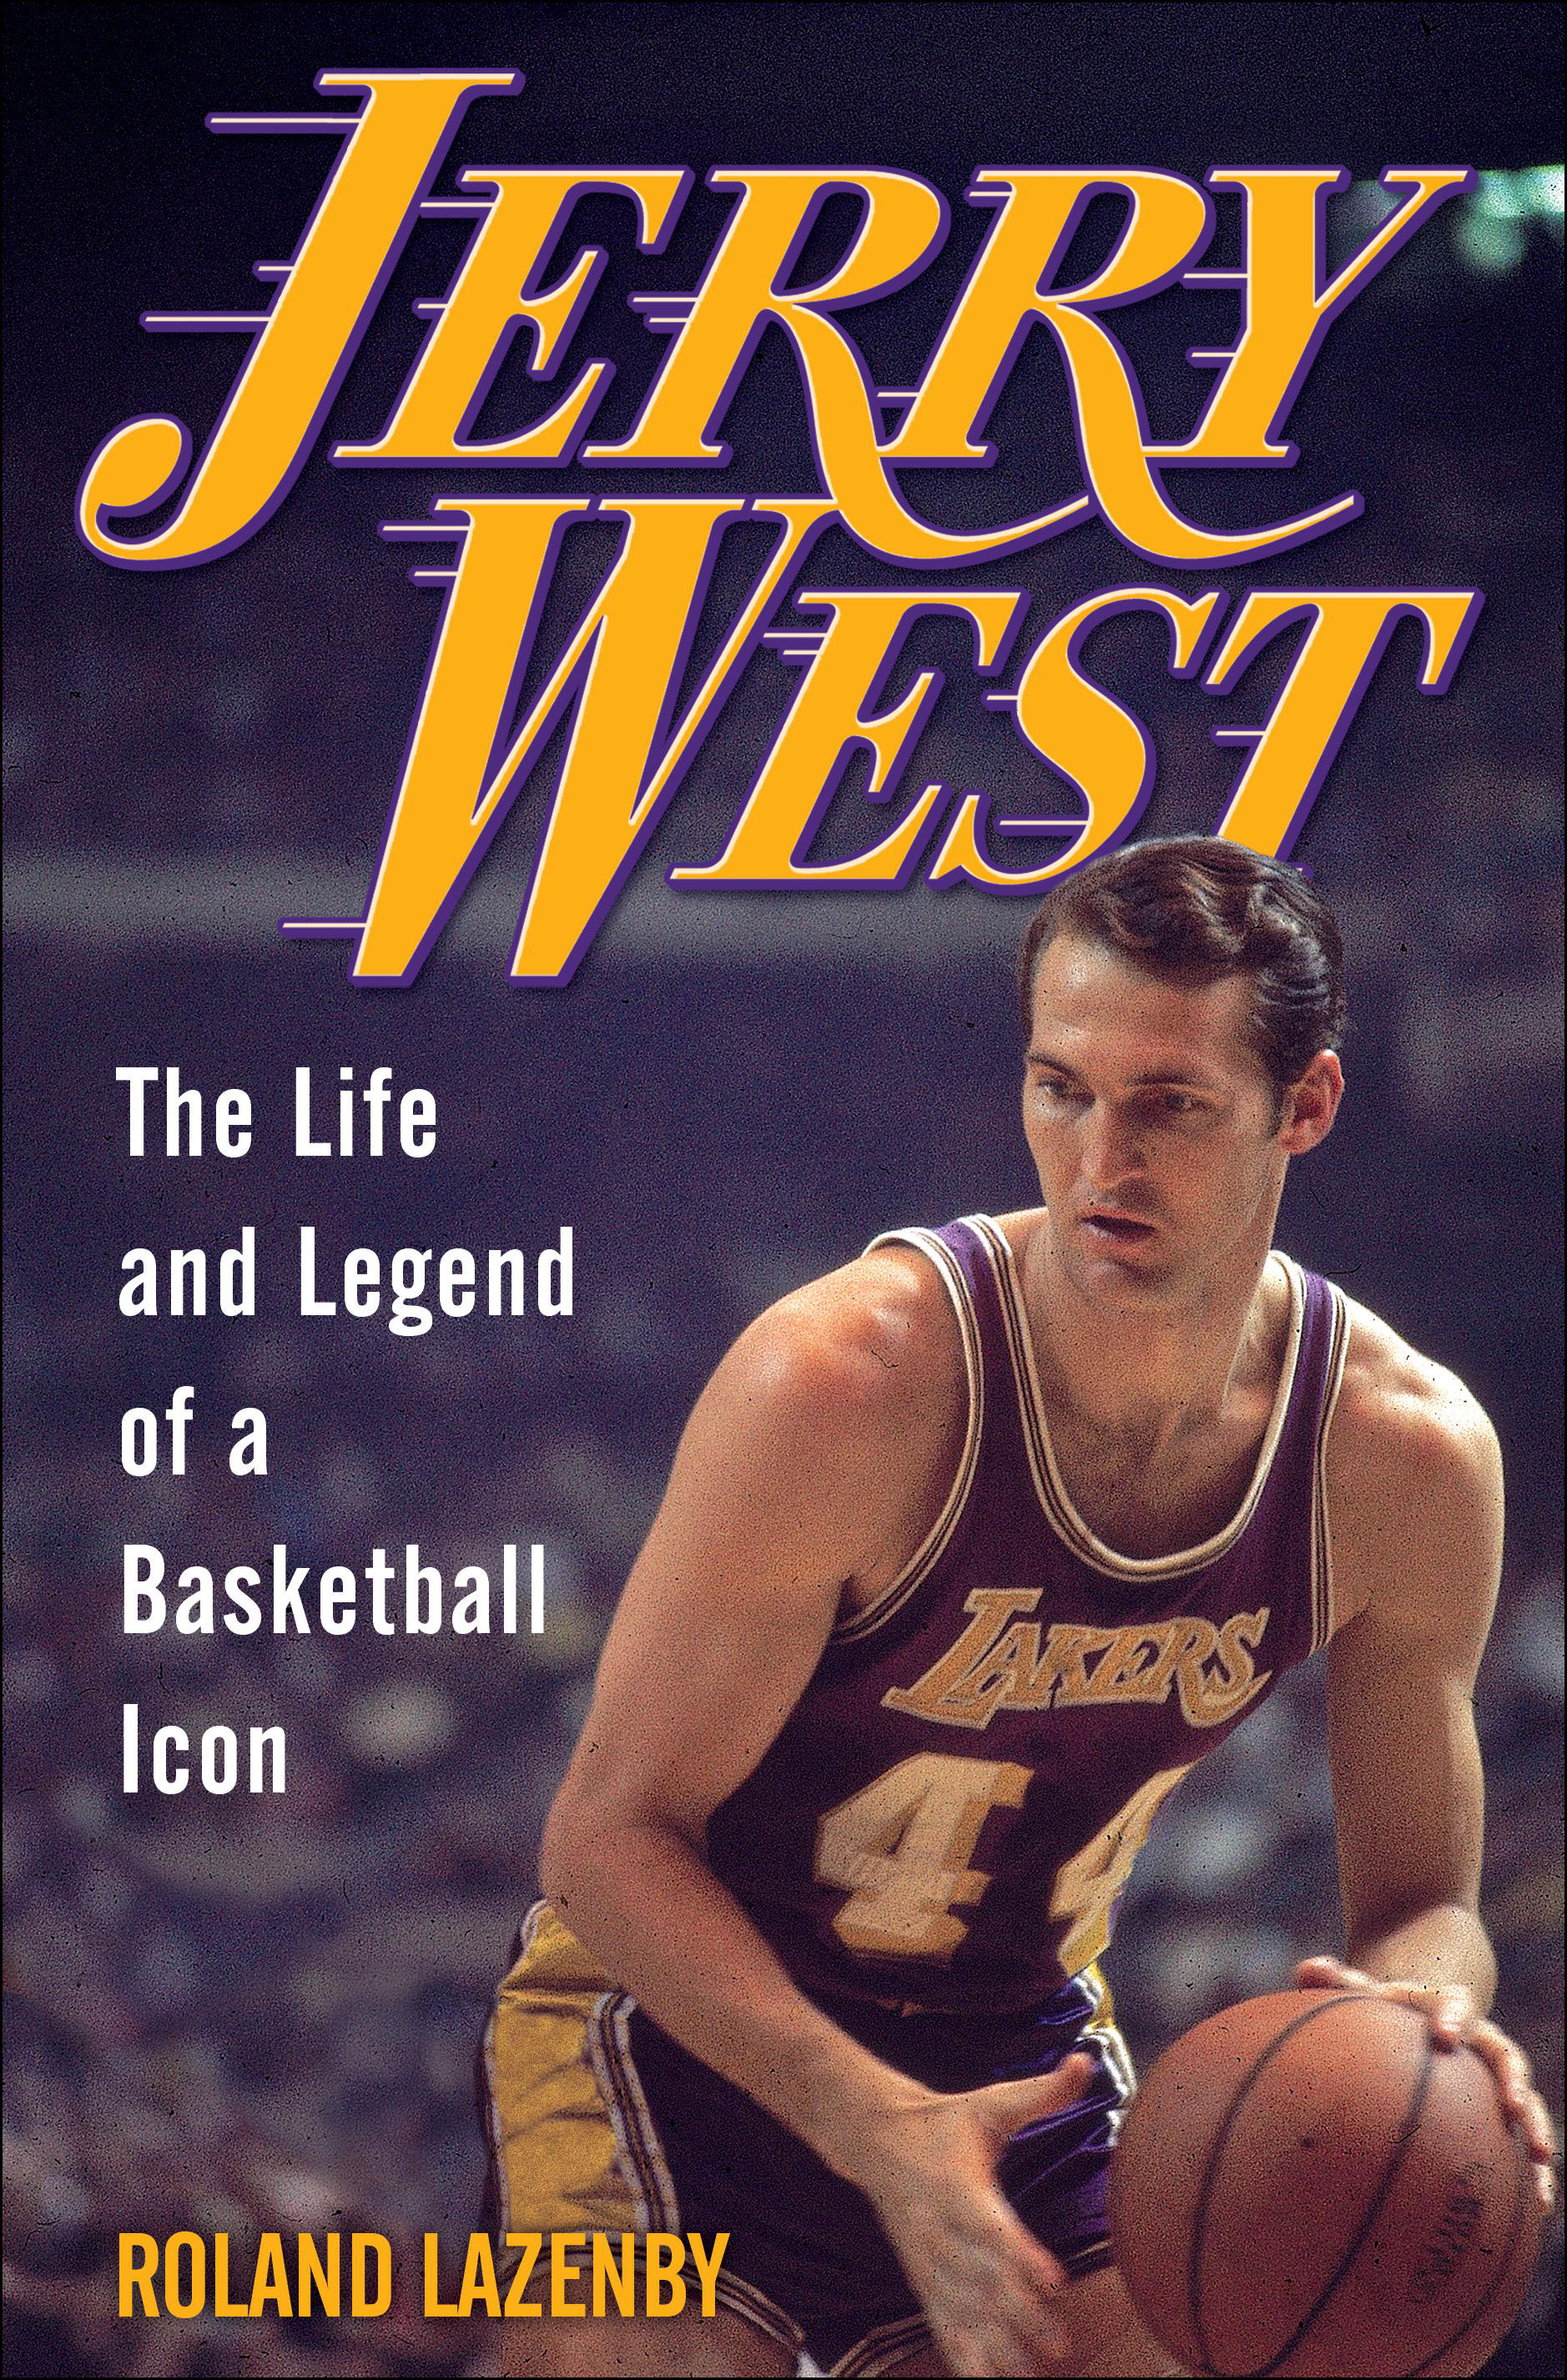 "Jerry West: The Life and Legend of a Basketball Icon"